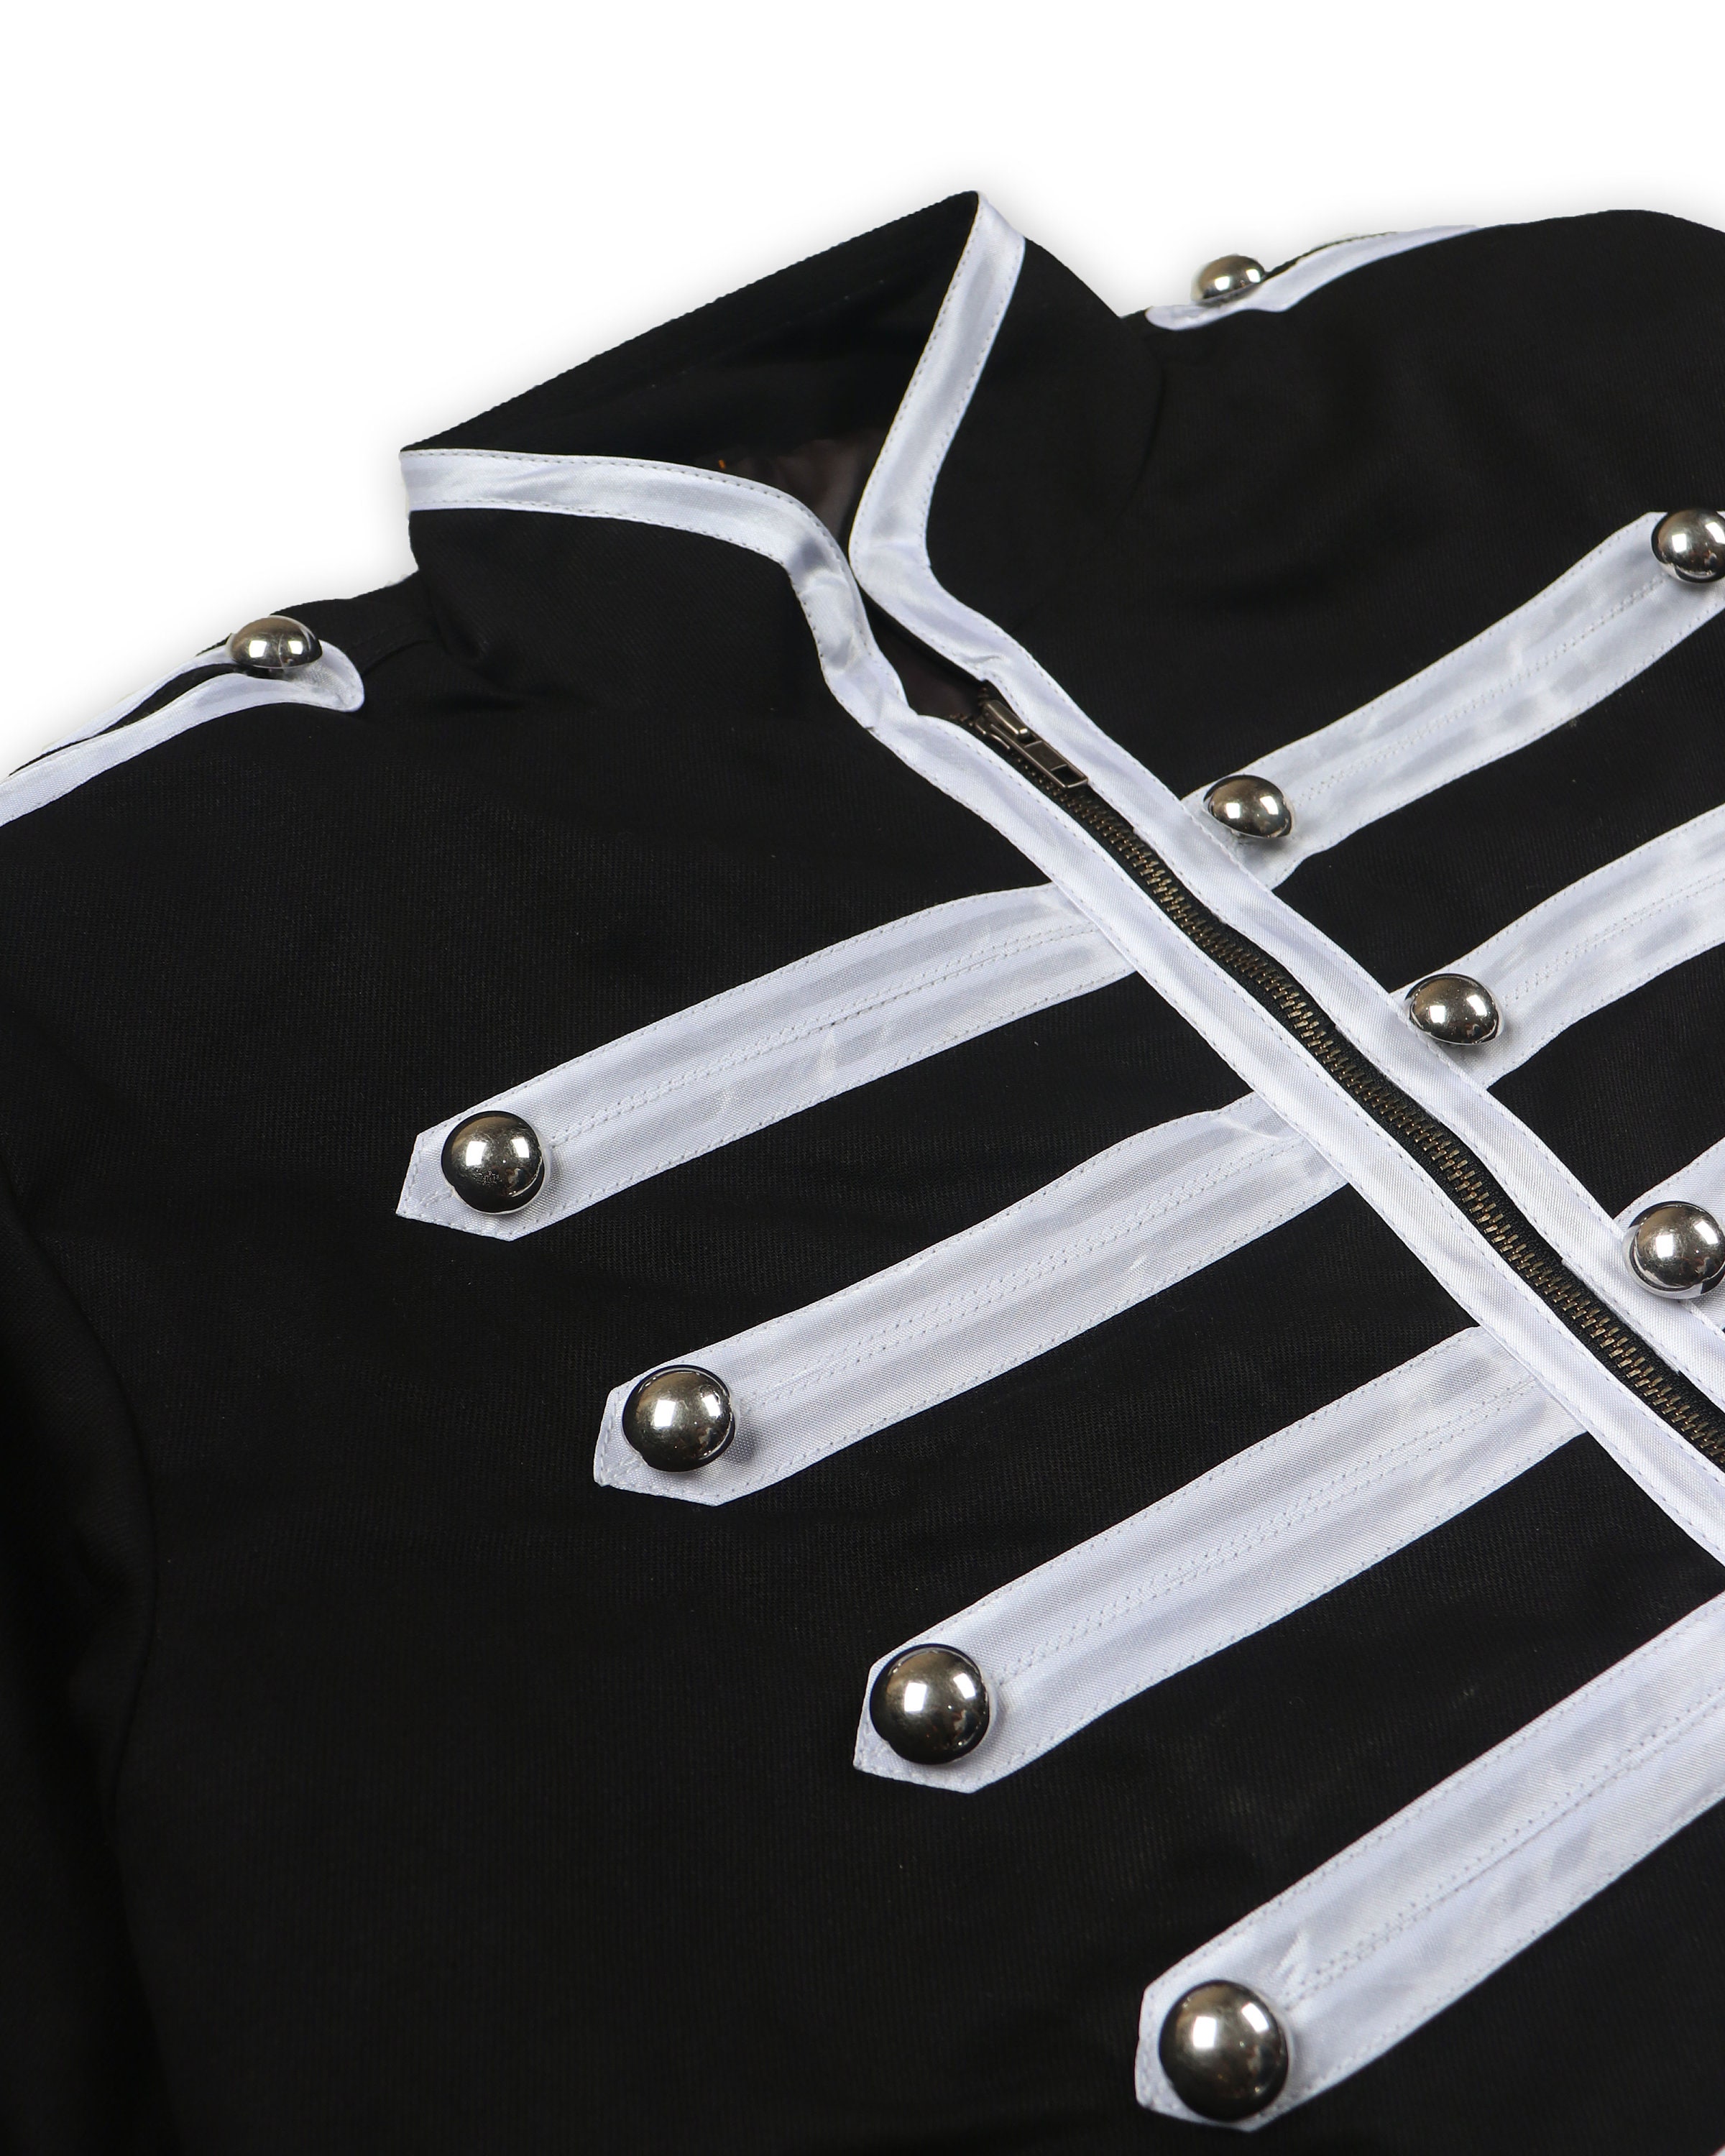 Men's Unique Gothic Steampunk Black Parade Military Marching Band Drummer Jacket